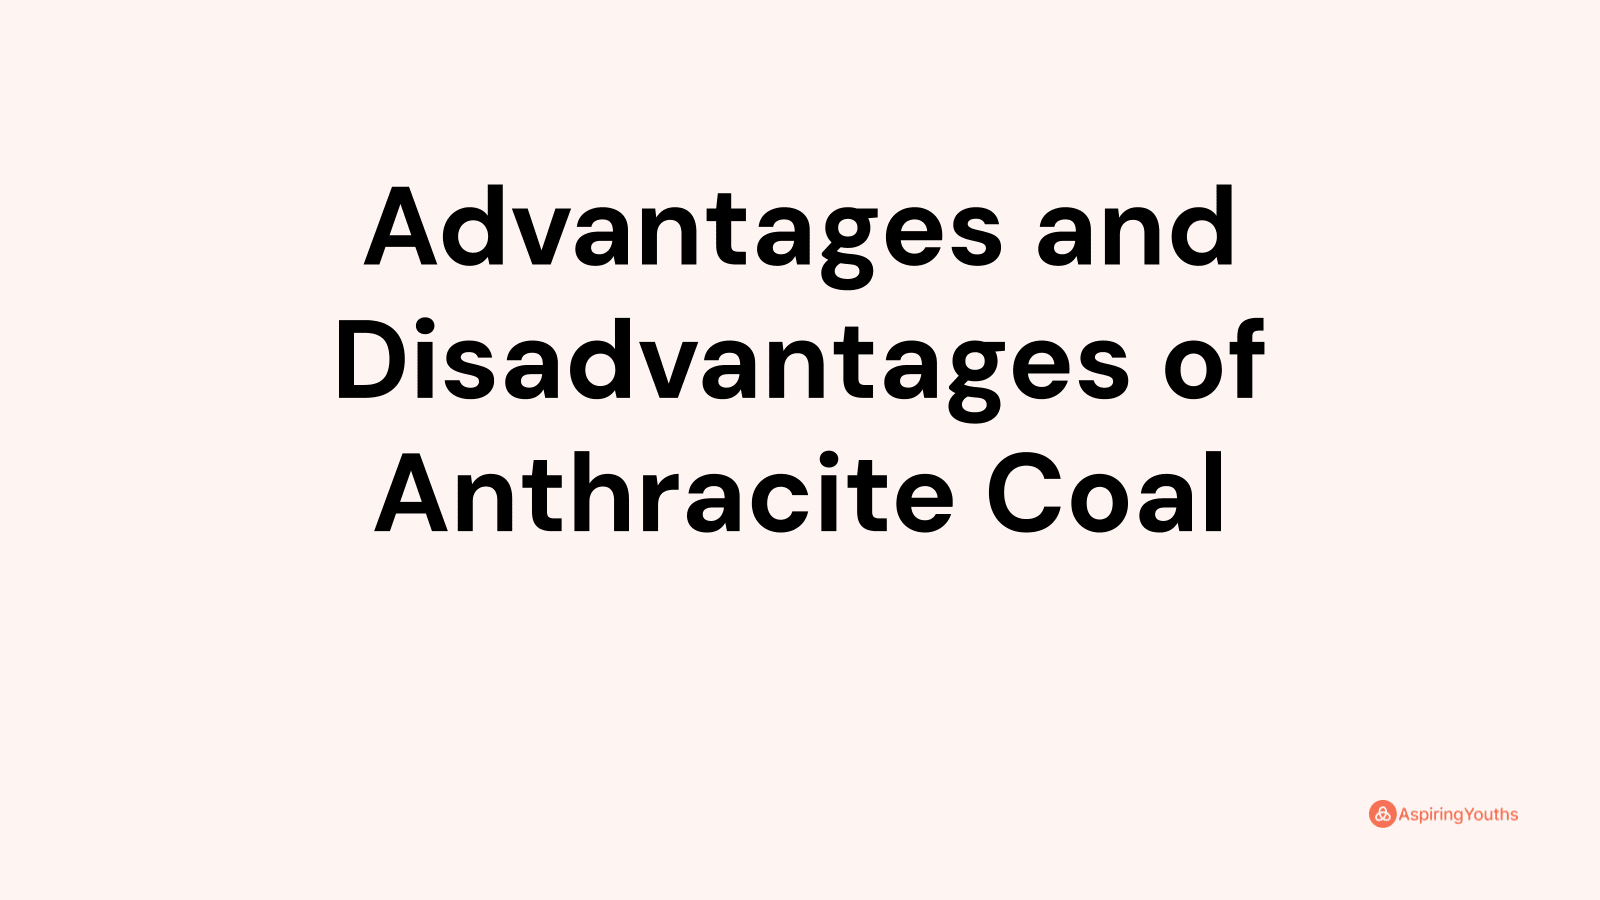 Advantages and disadvantages of Anthracite Coal